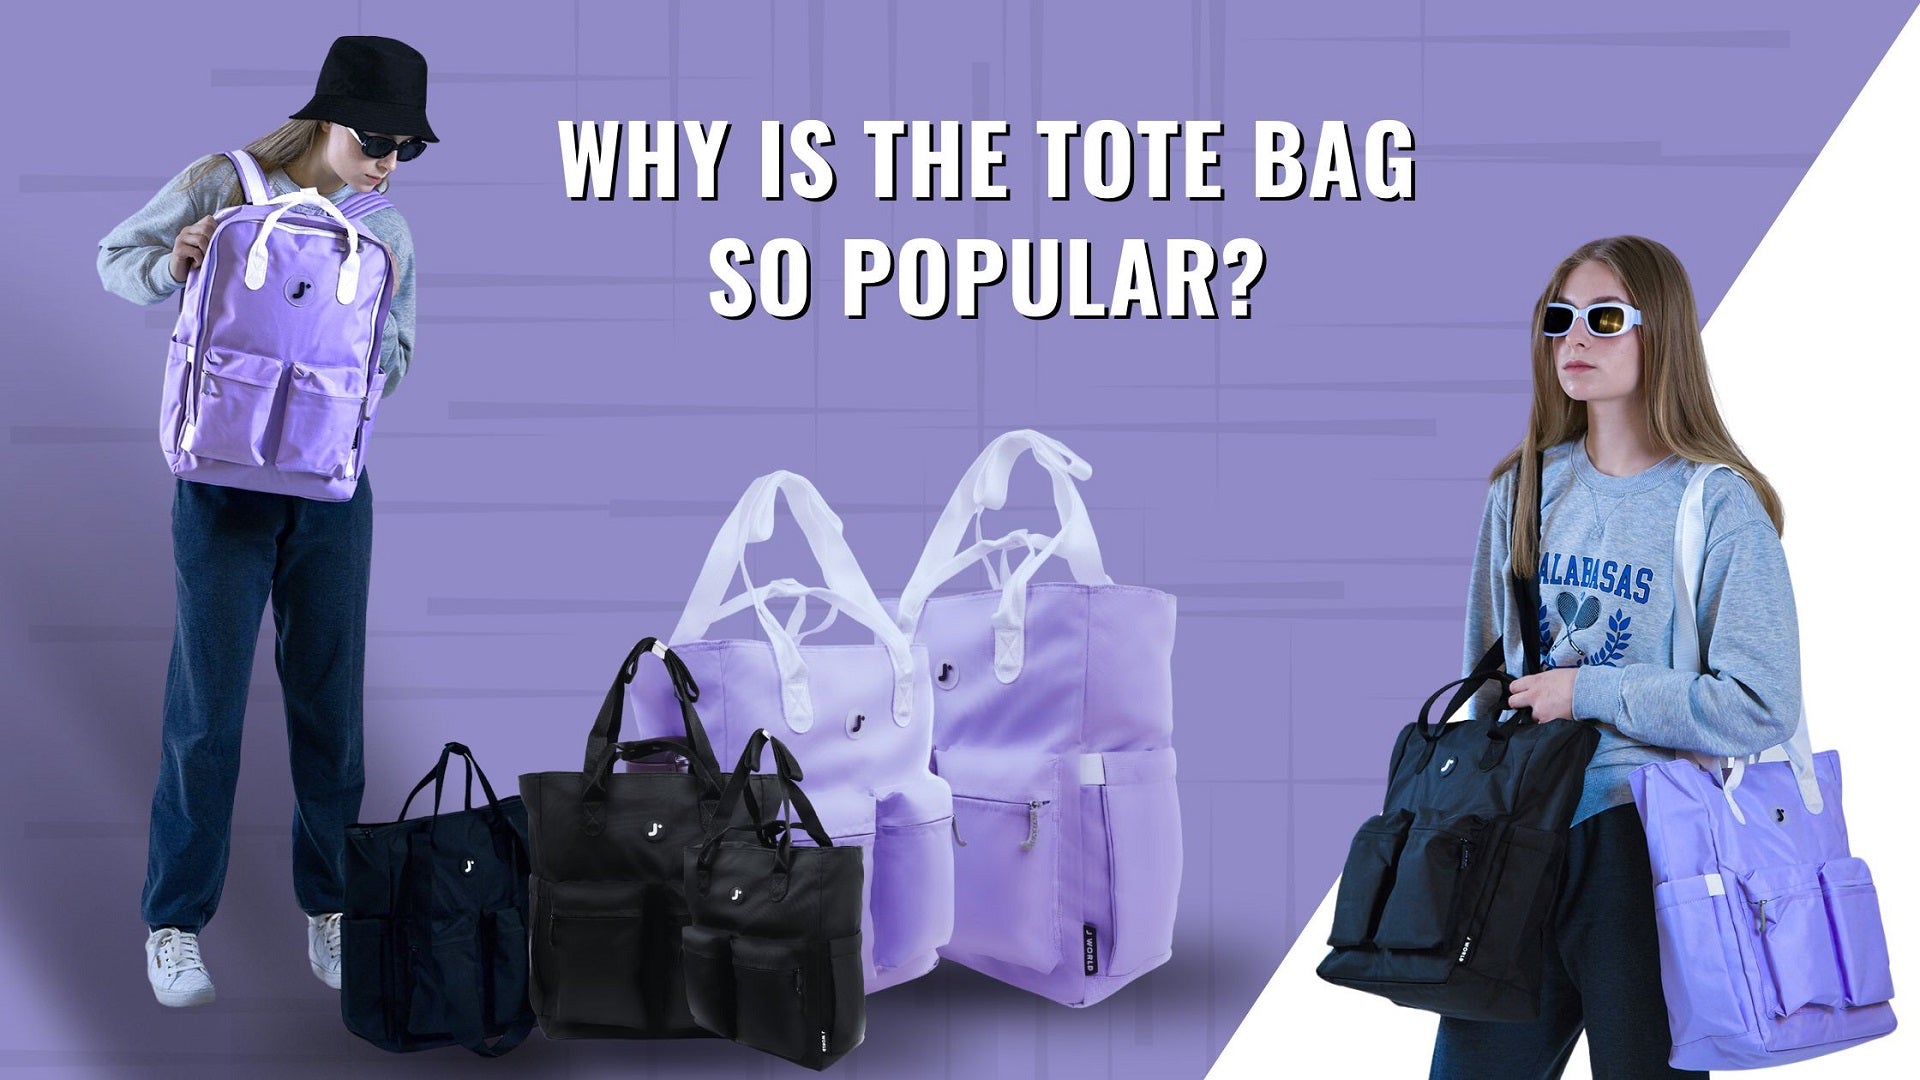 Why Is the Tote Bag So Popular?